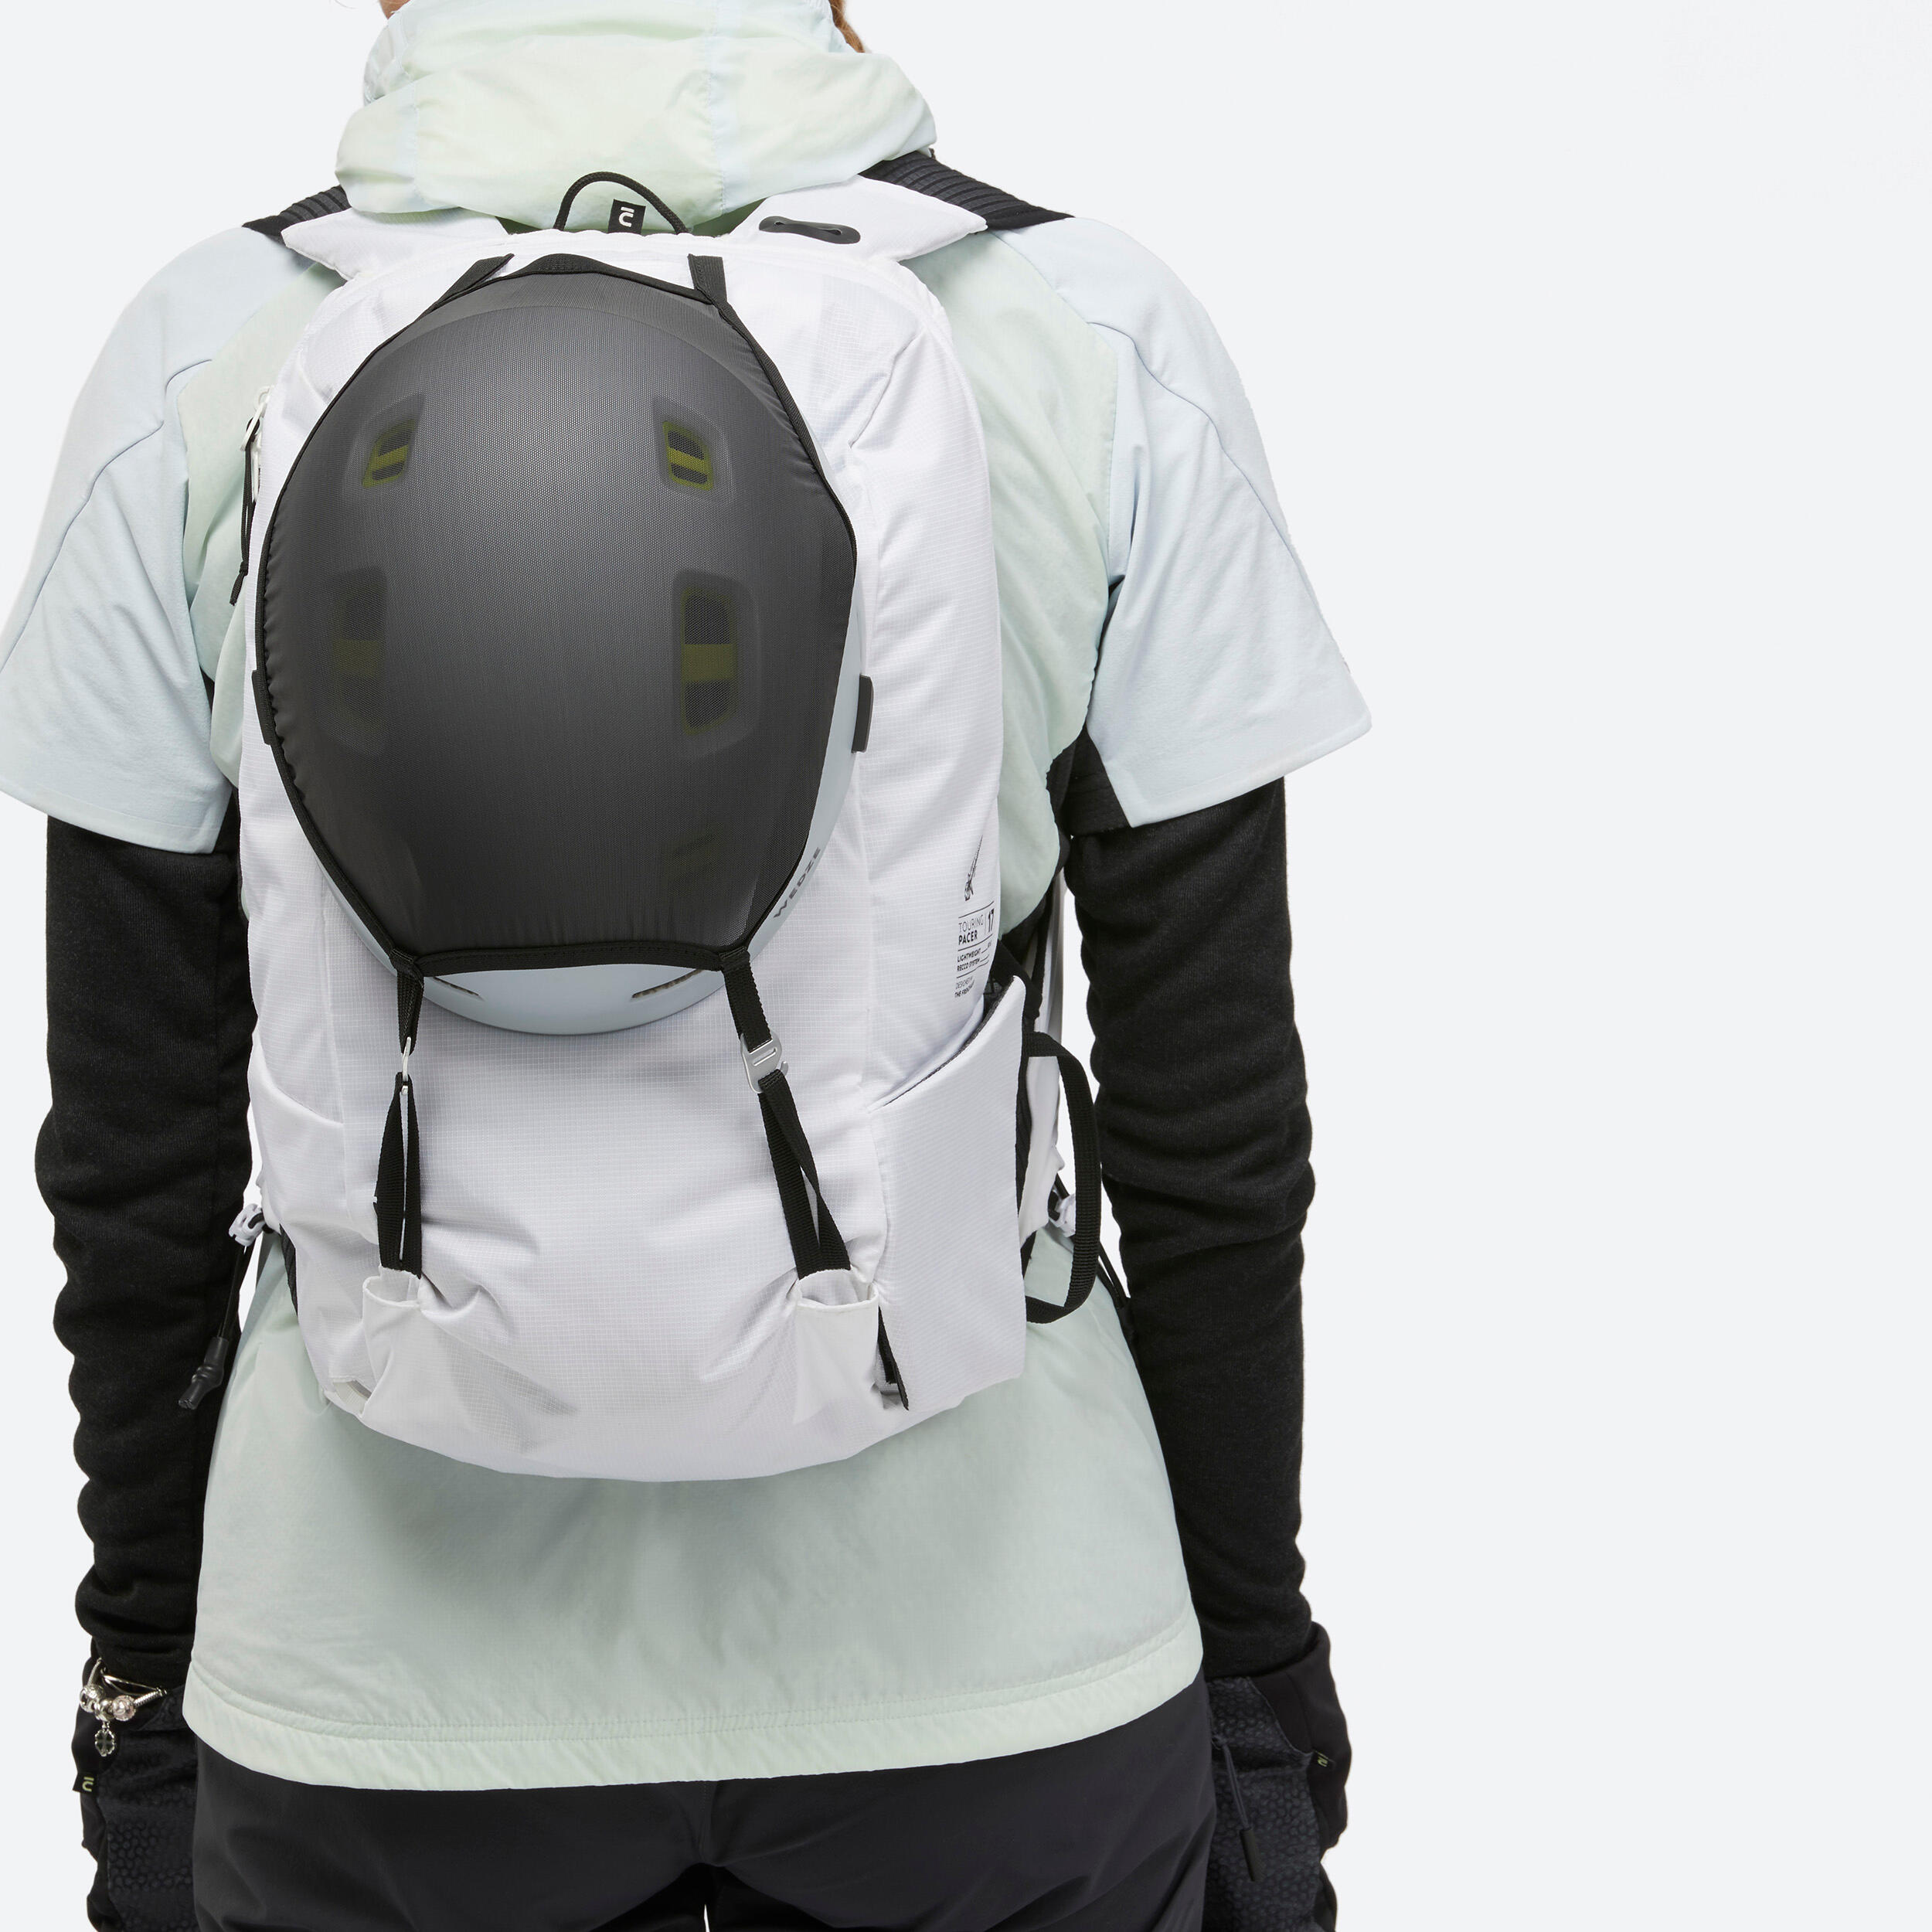 Ski Touring Backpack 17 L - PACER  White and Black 9/18